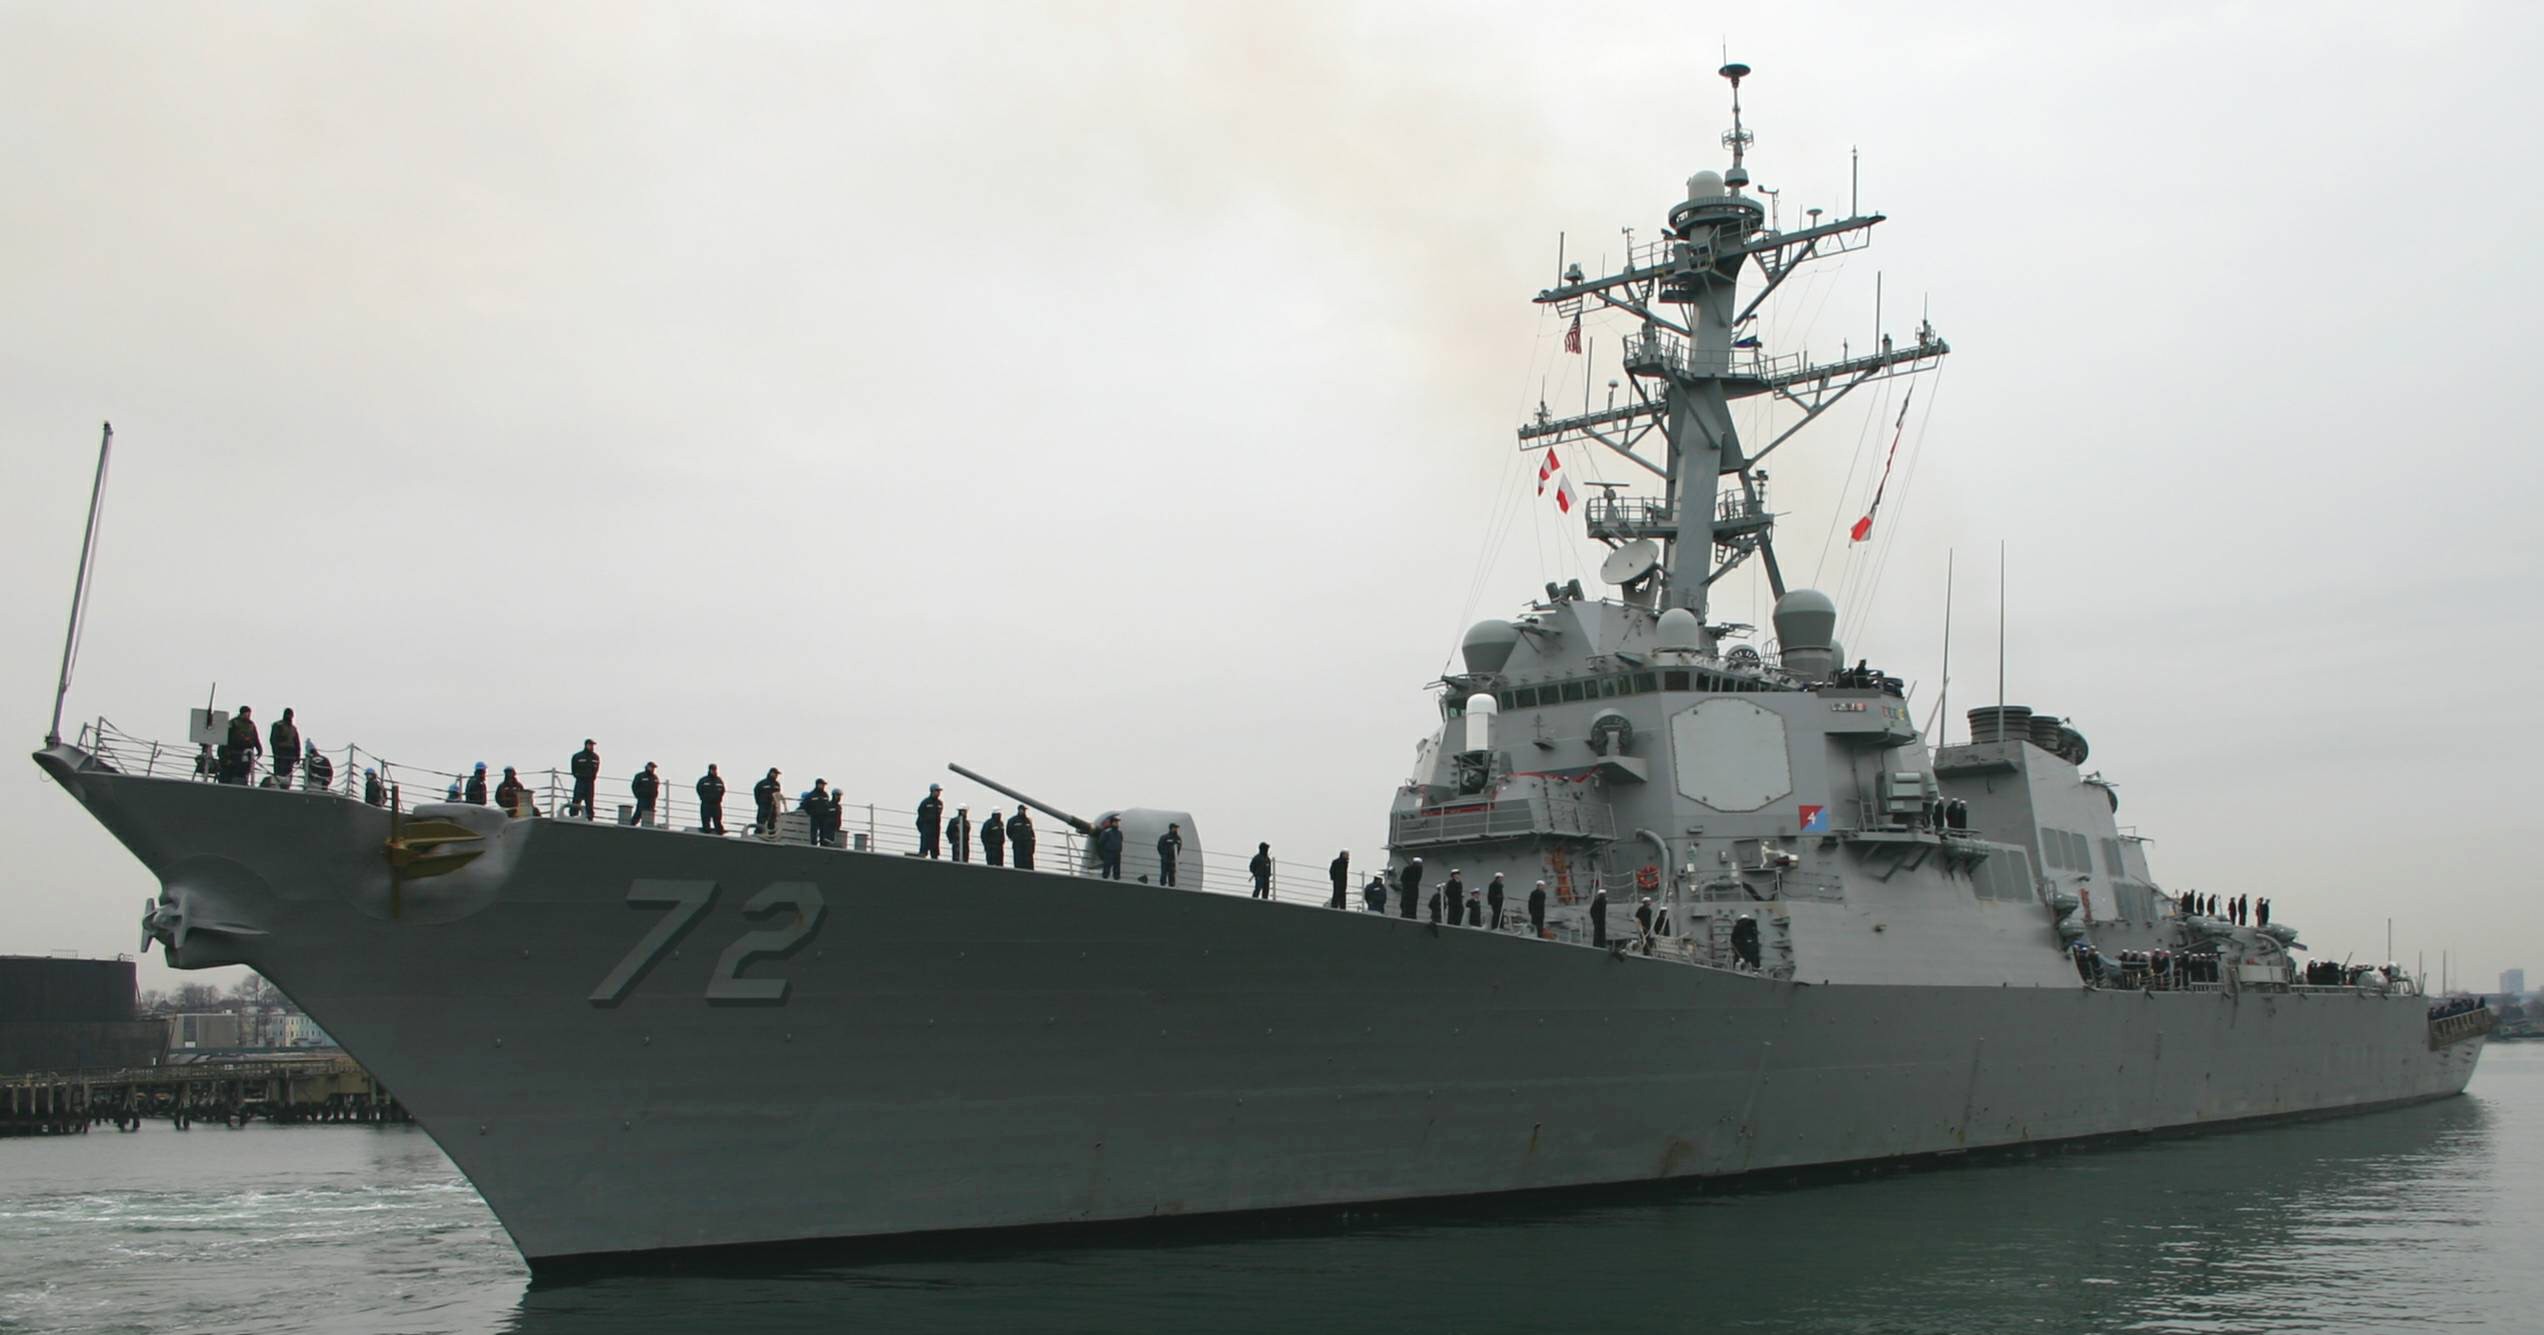 ddg-72 uss mahan guided missile destroyer arleigh burke class aegis bmd 38